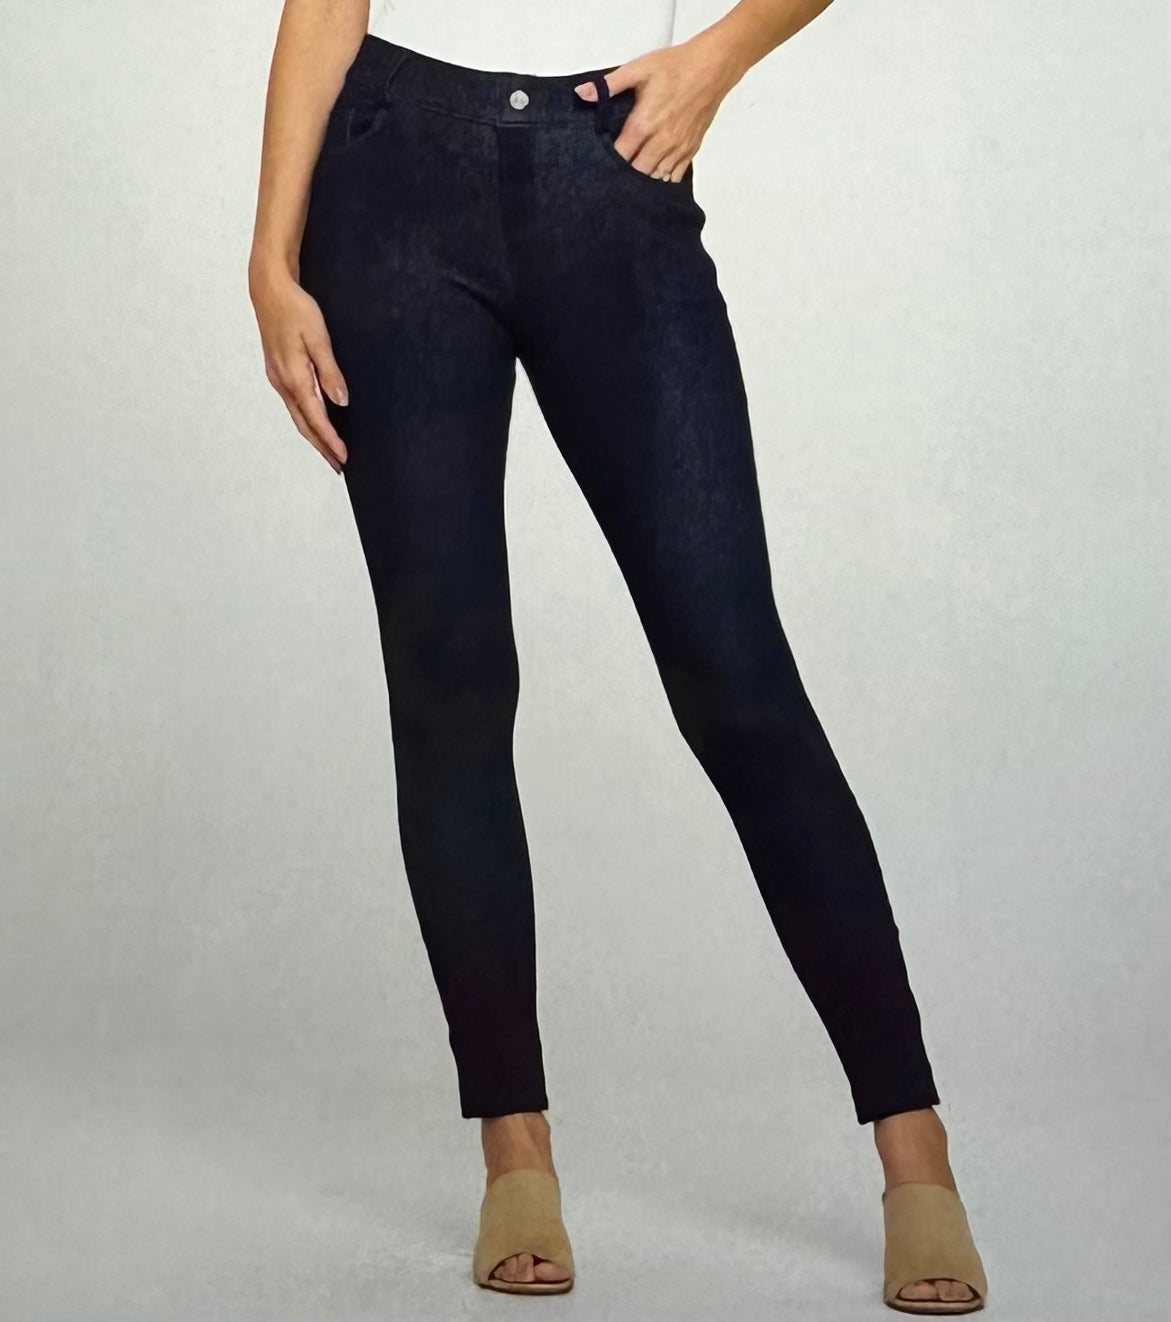 Navy Soft Knit Jeggings - Shop Daffodils Boutique